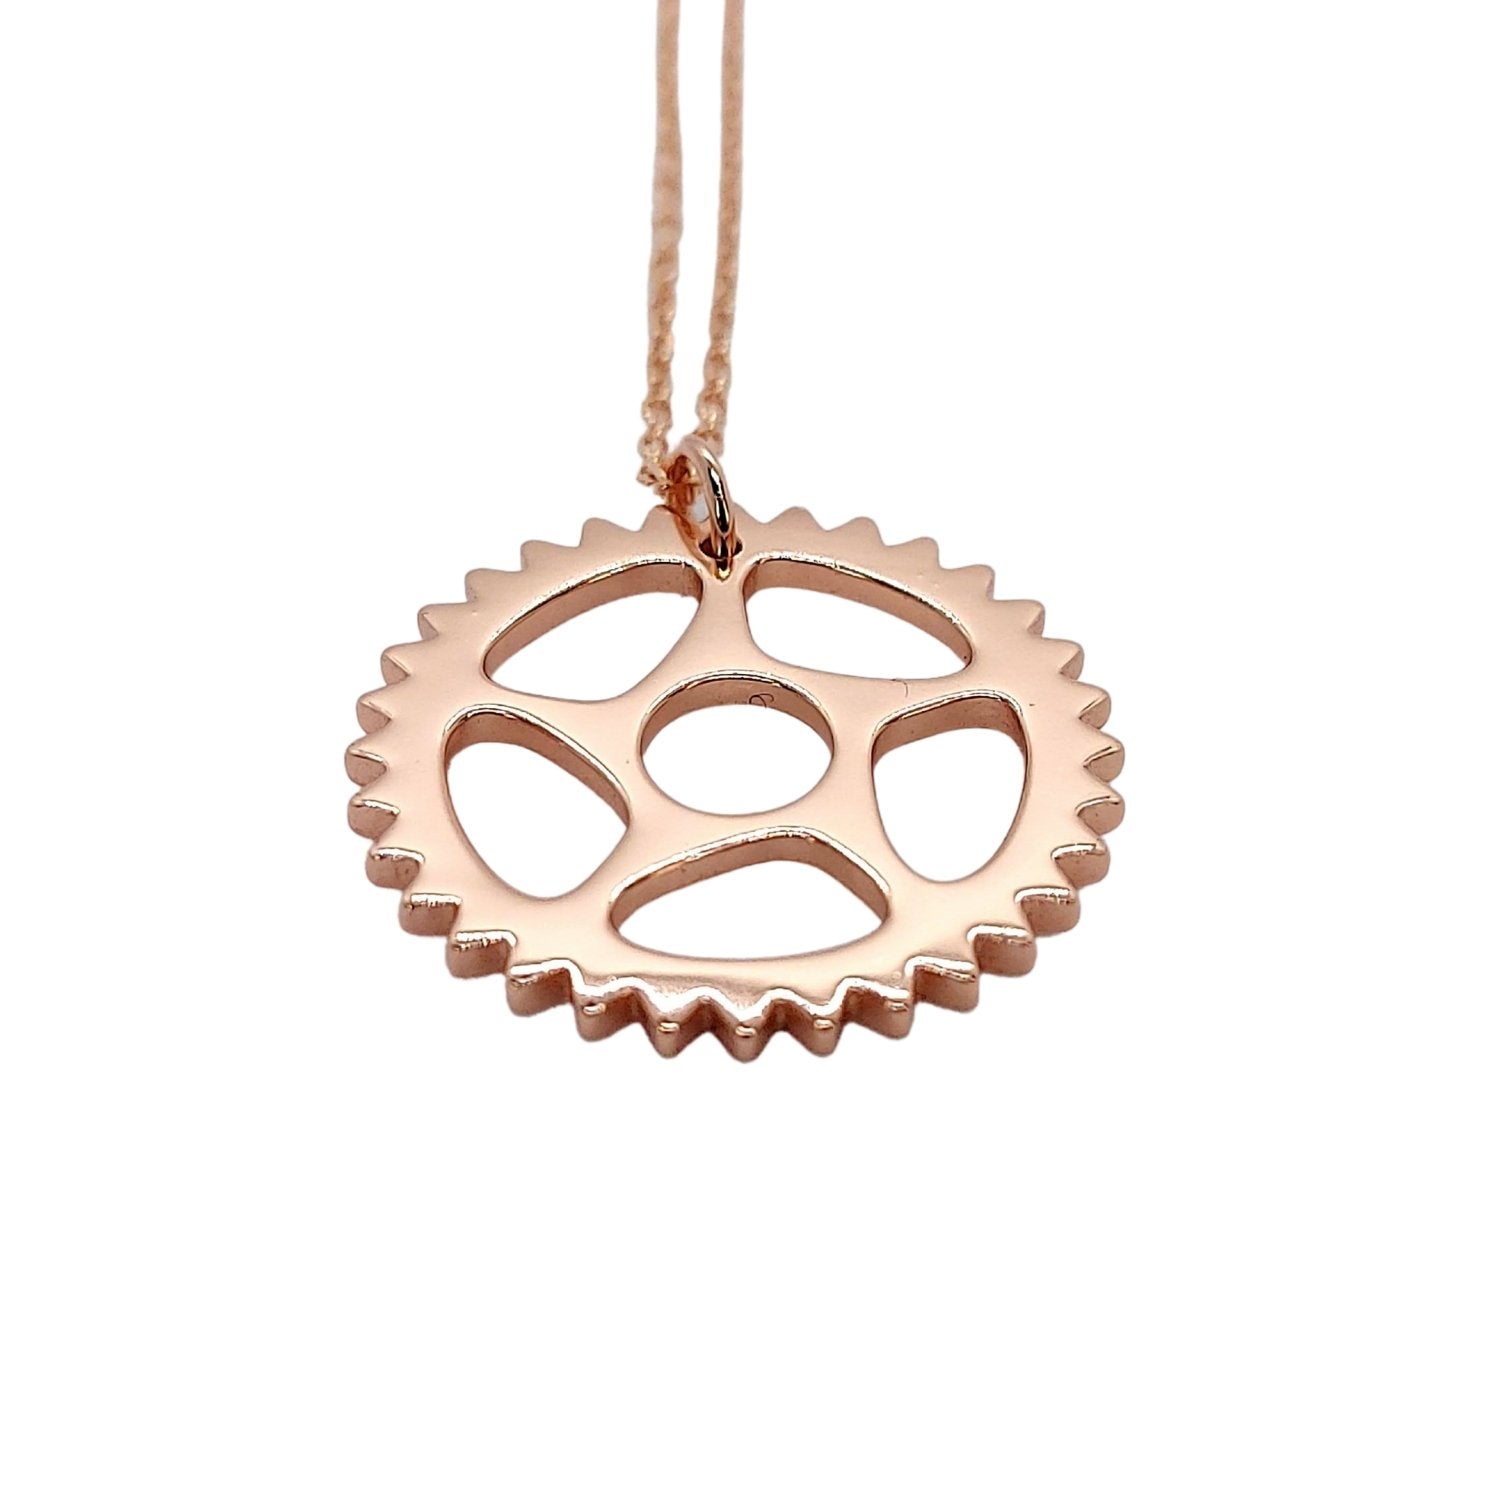 18 rose gold plated bike chain ring design pendant necklace with a white background